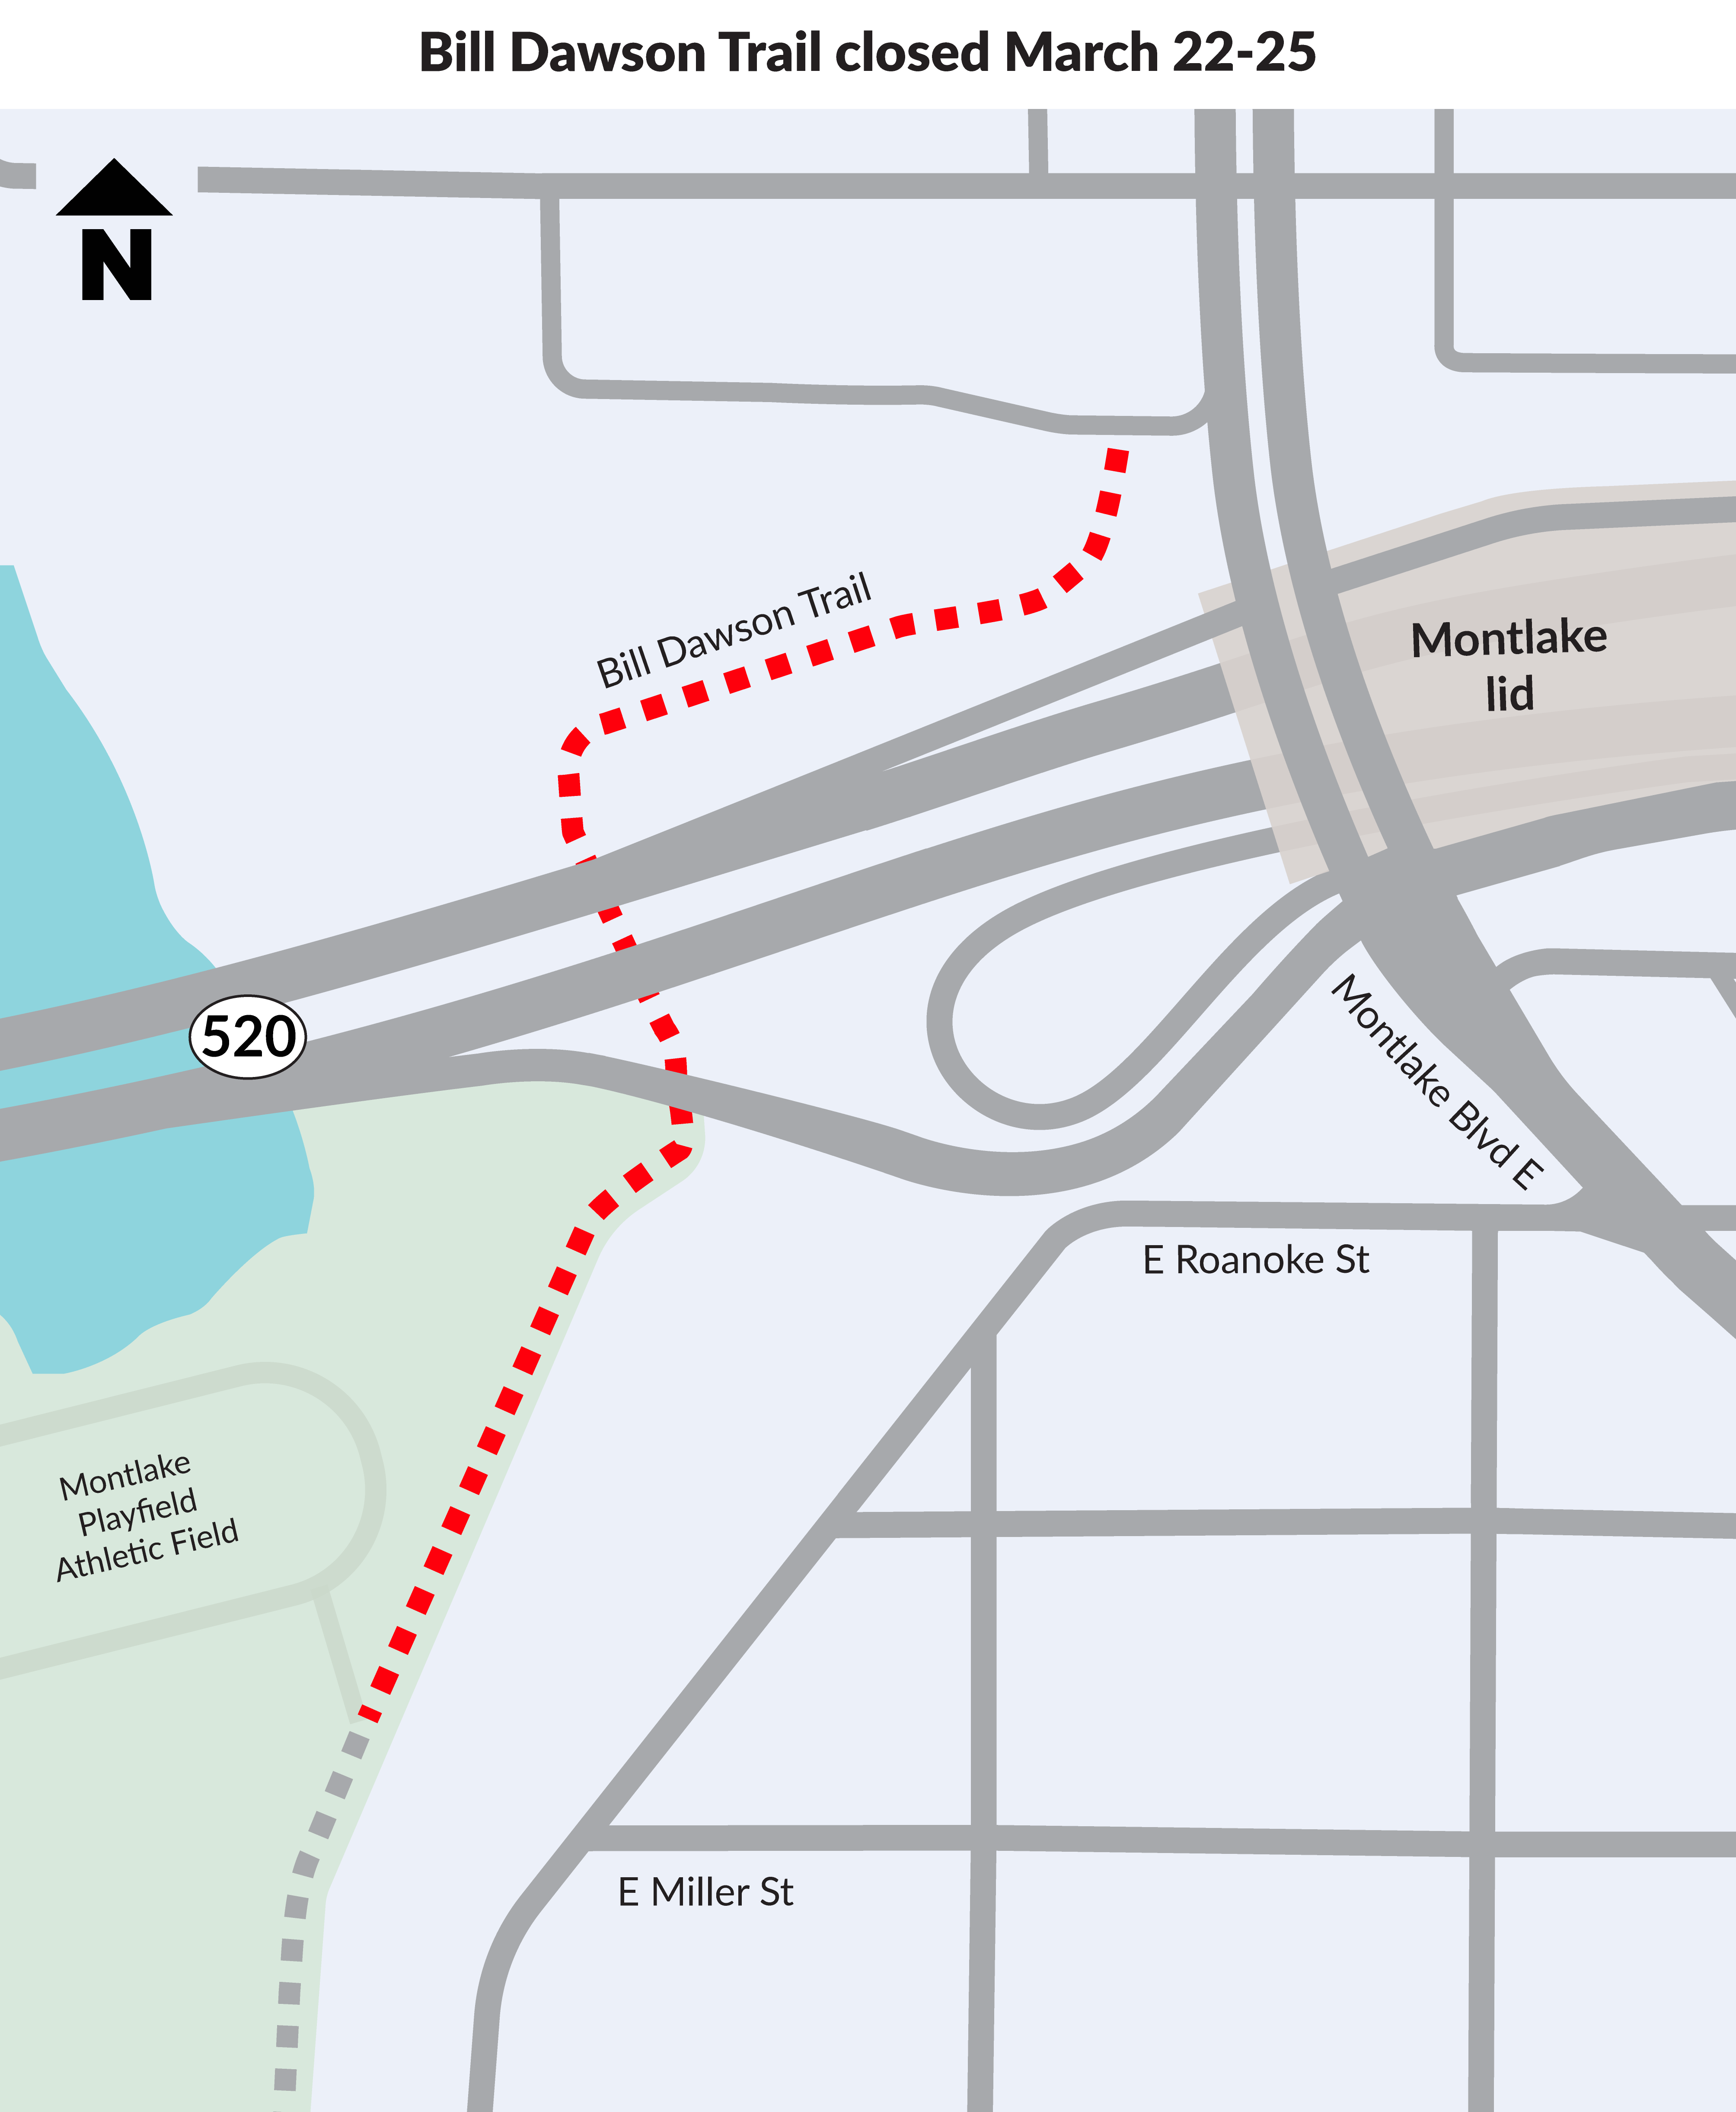 Map of Bill Dawson Trail Closure, from Montlake Blvd. to entrance of Montlake Playfield